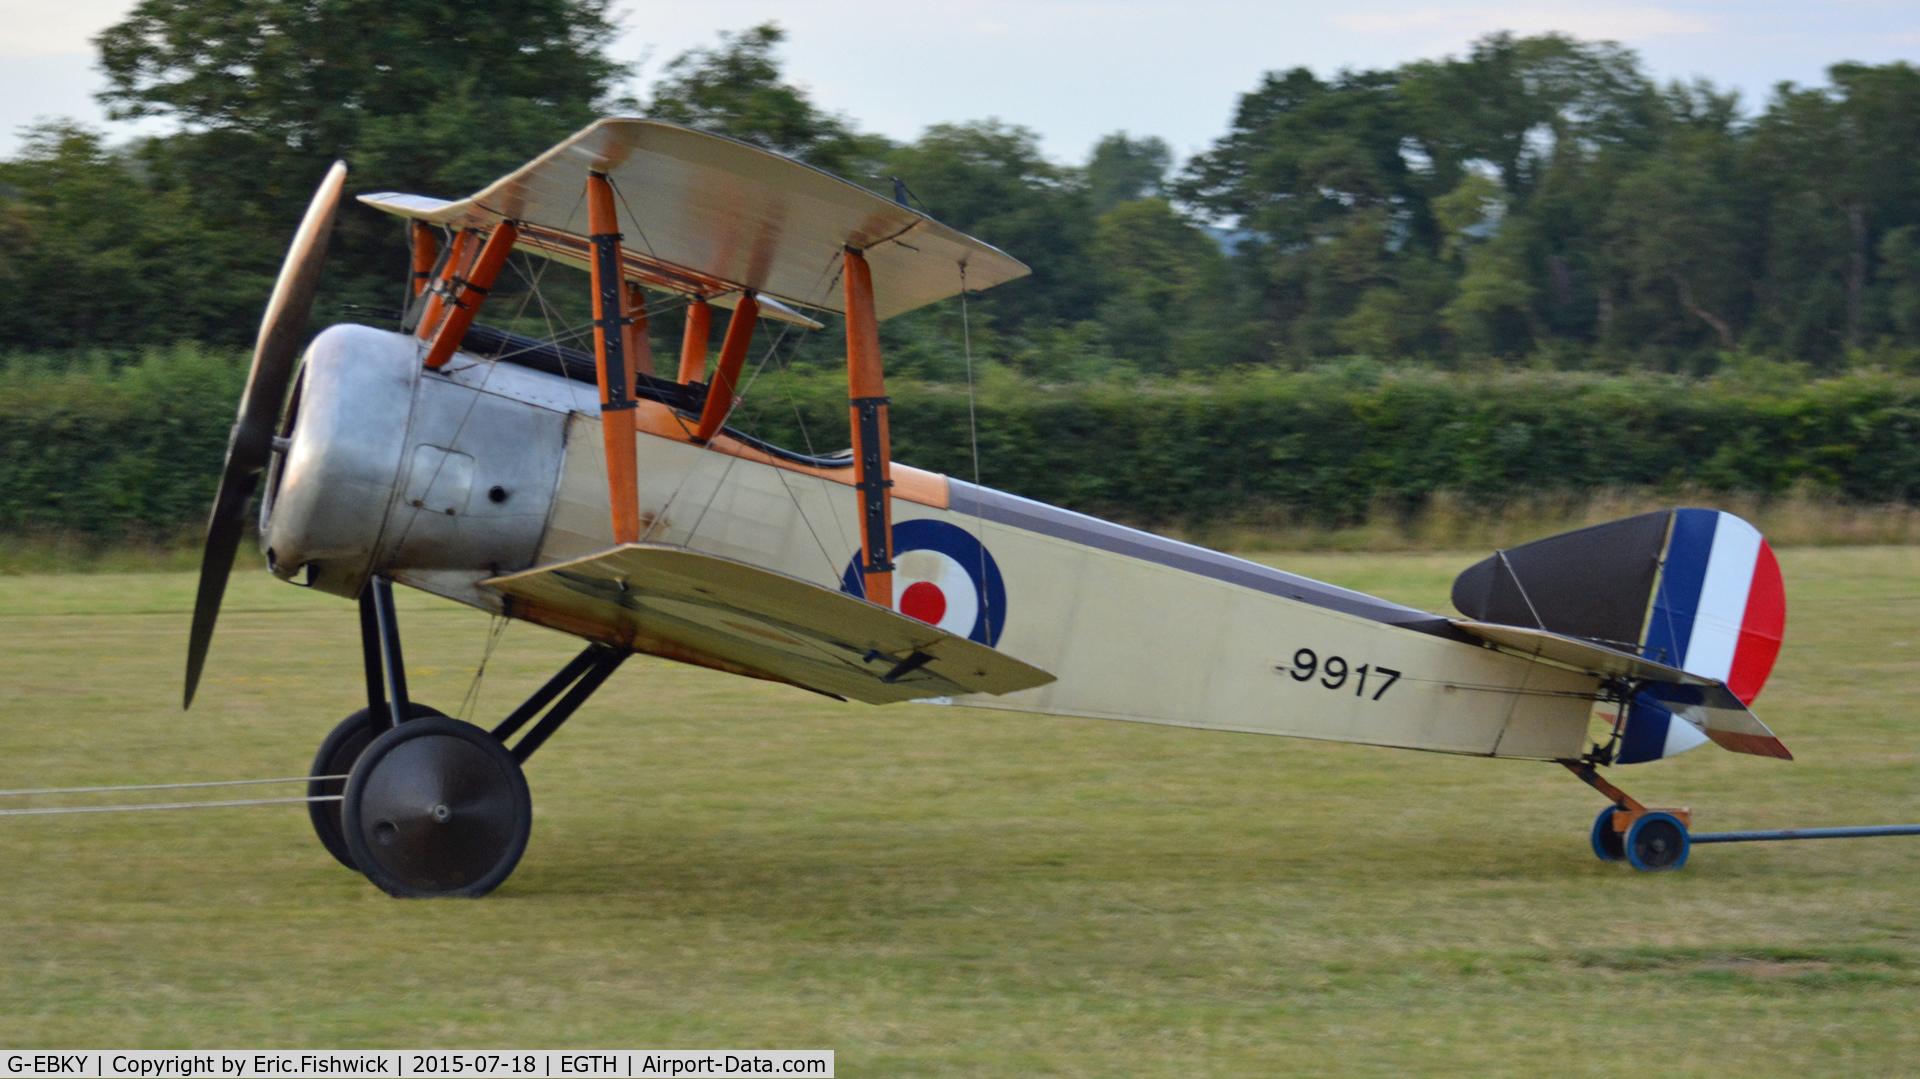 G-EBKY, 1920 Sopwith Pup C/N W/O 3004/14, 1. 9917 in the twilight zone at the end of a very busy Shuttleworth Best of British Airshow, July 2015.